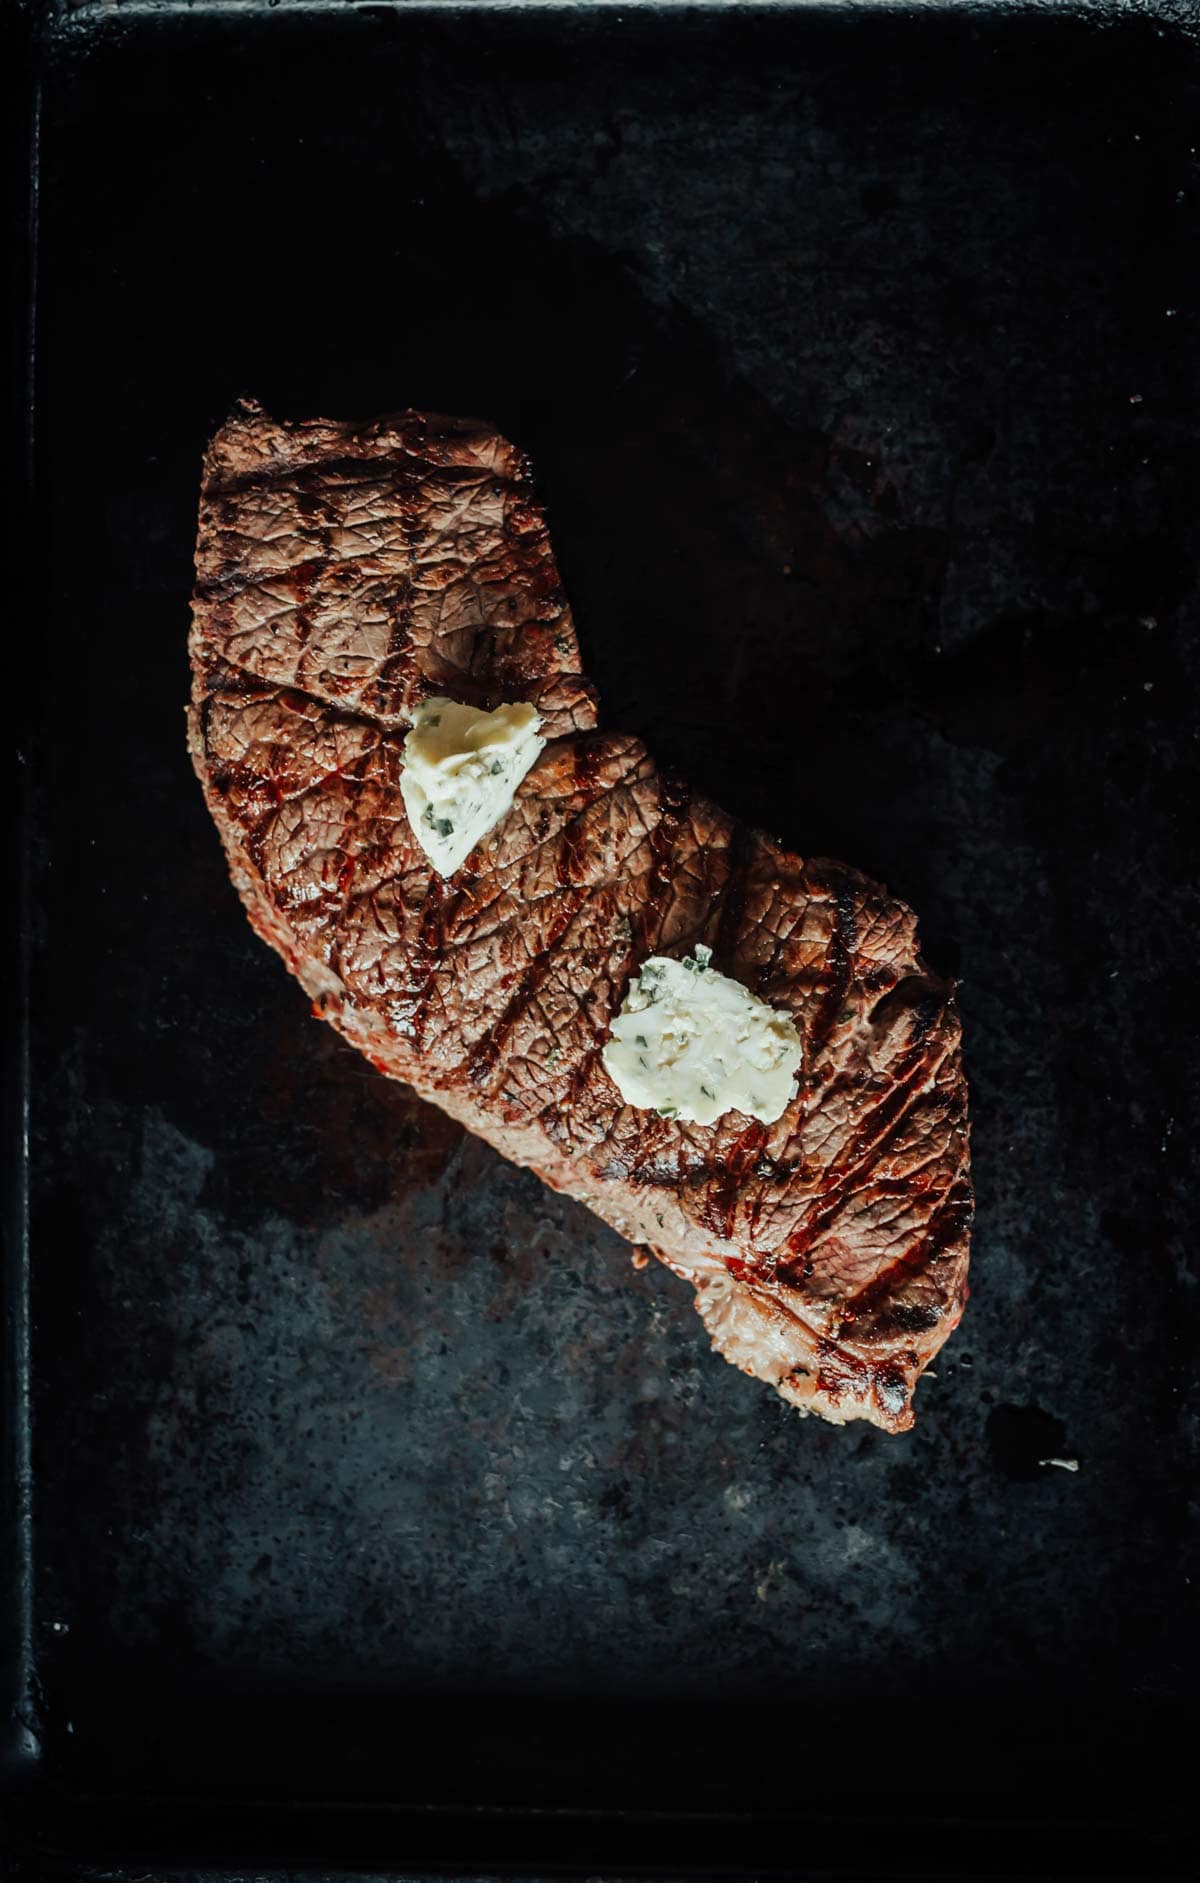 A grilled steak resting with two small pats of melting butter on top, placed on a dark surface.